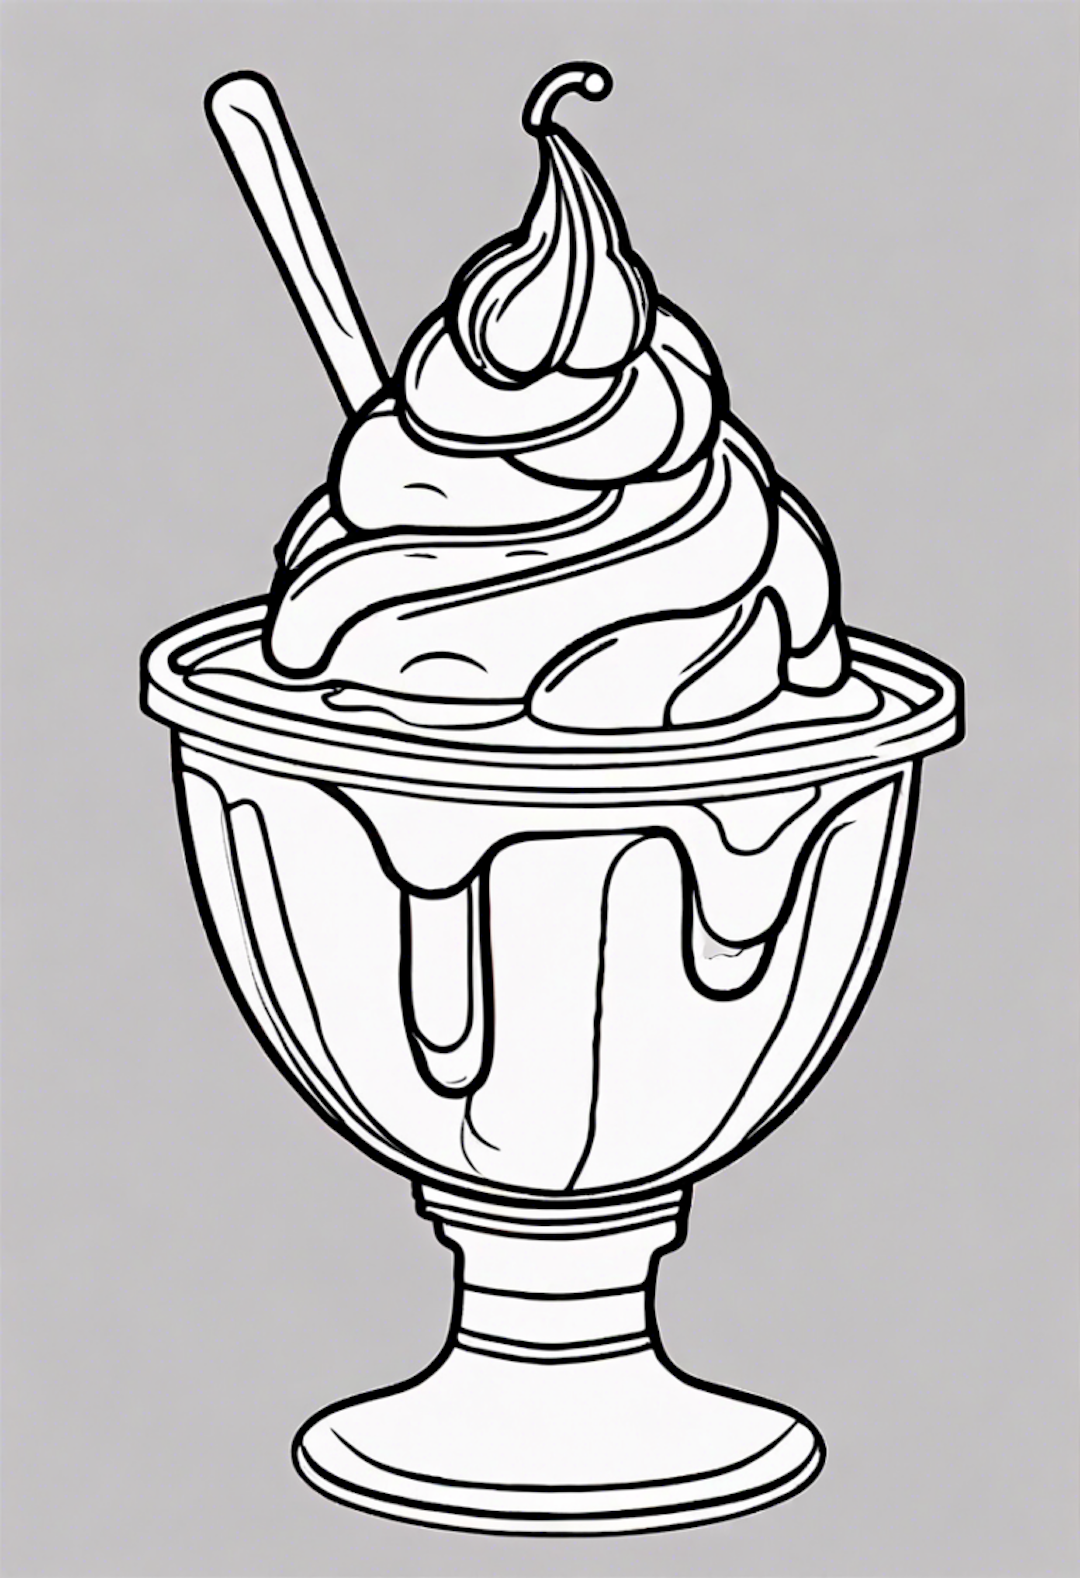 Ice Cream Sundae Coloring Fun coloring pages